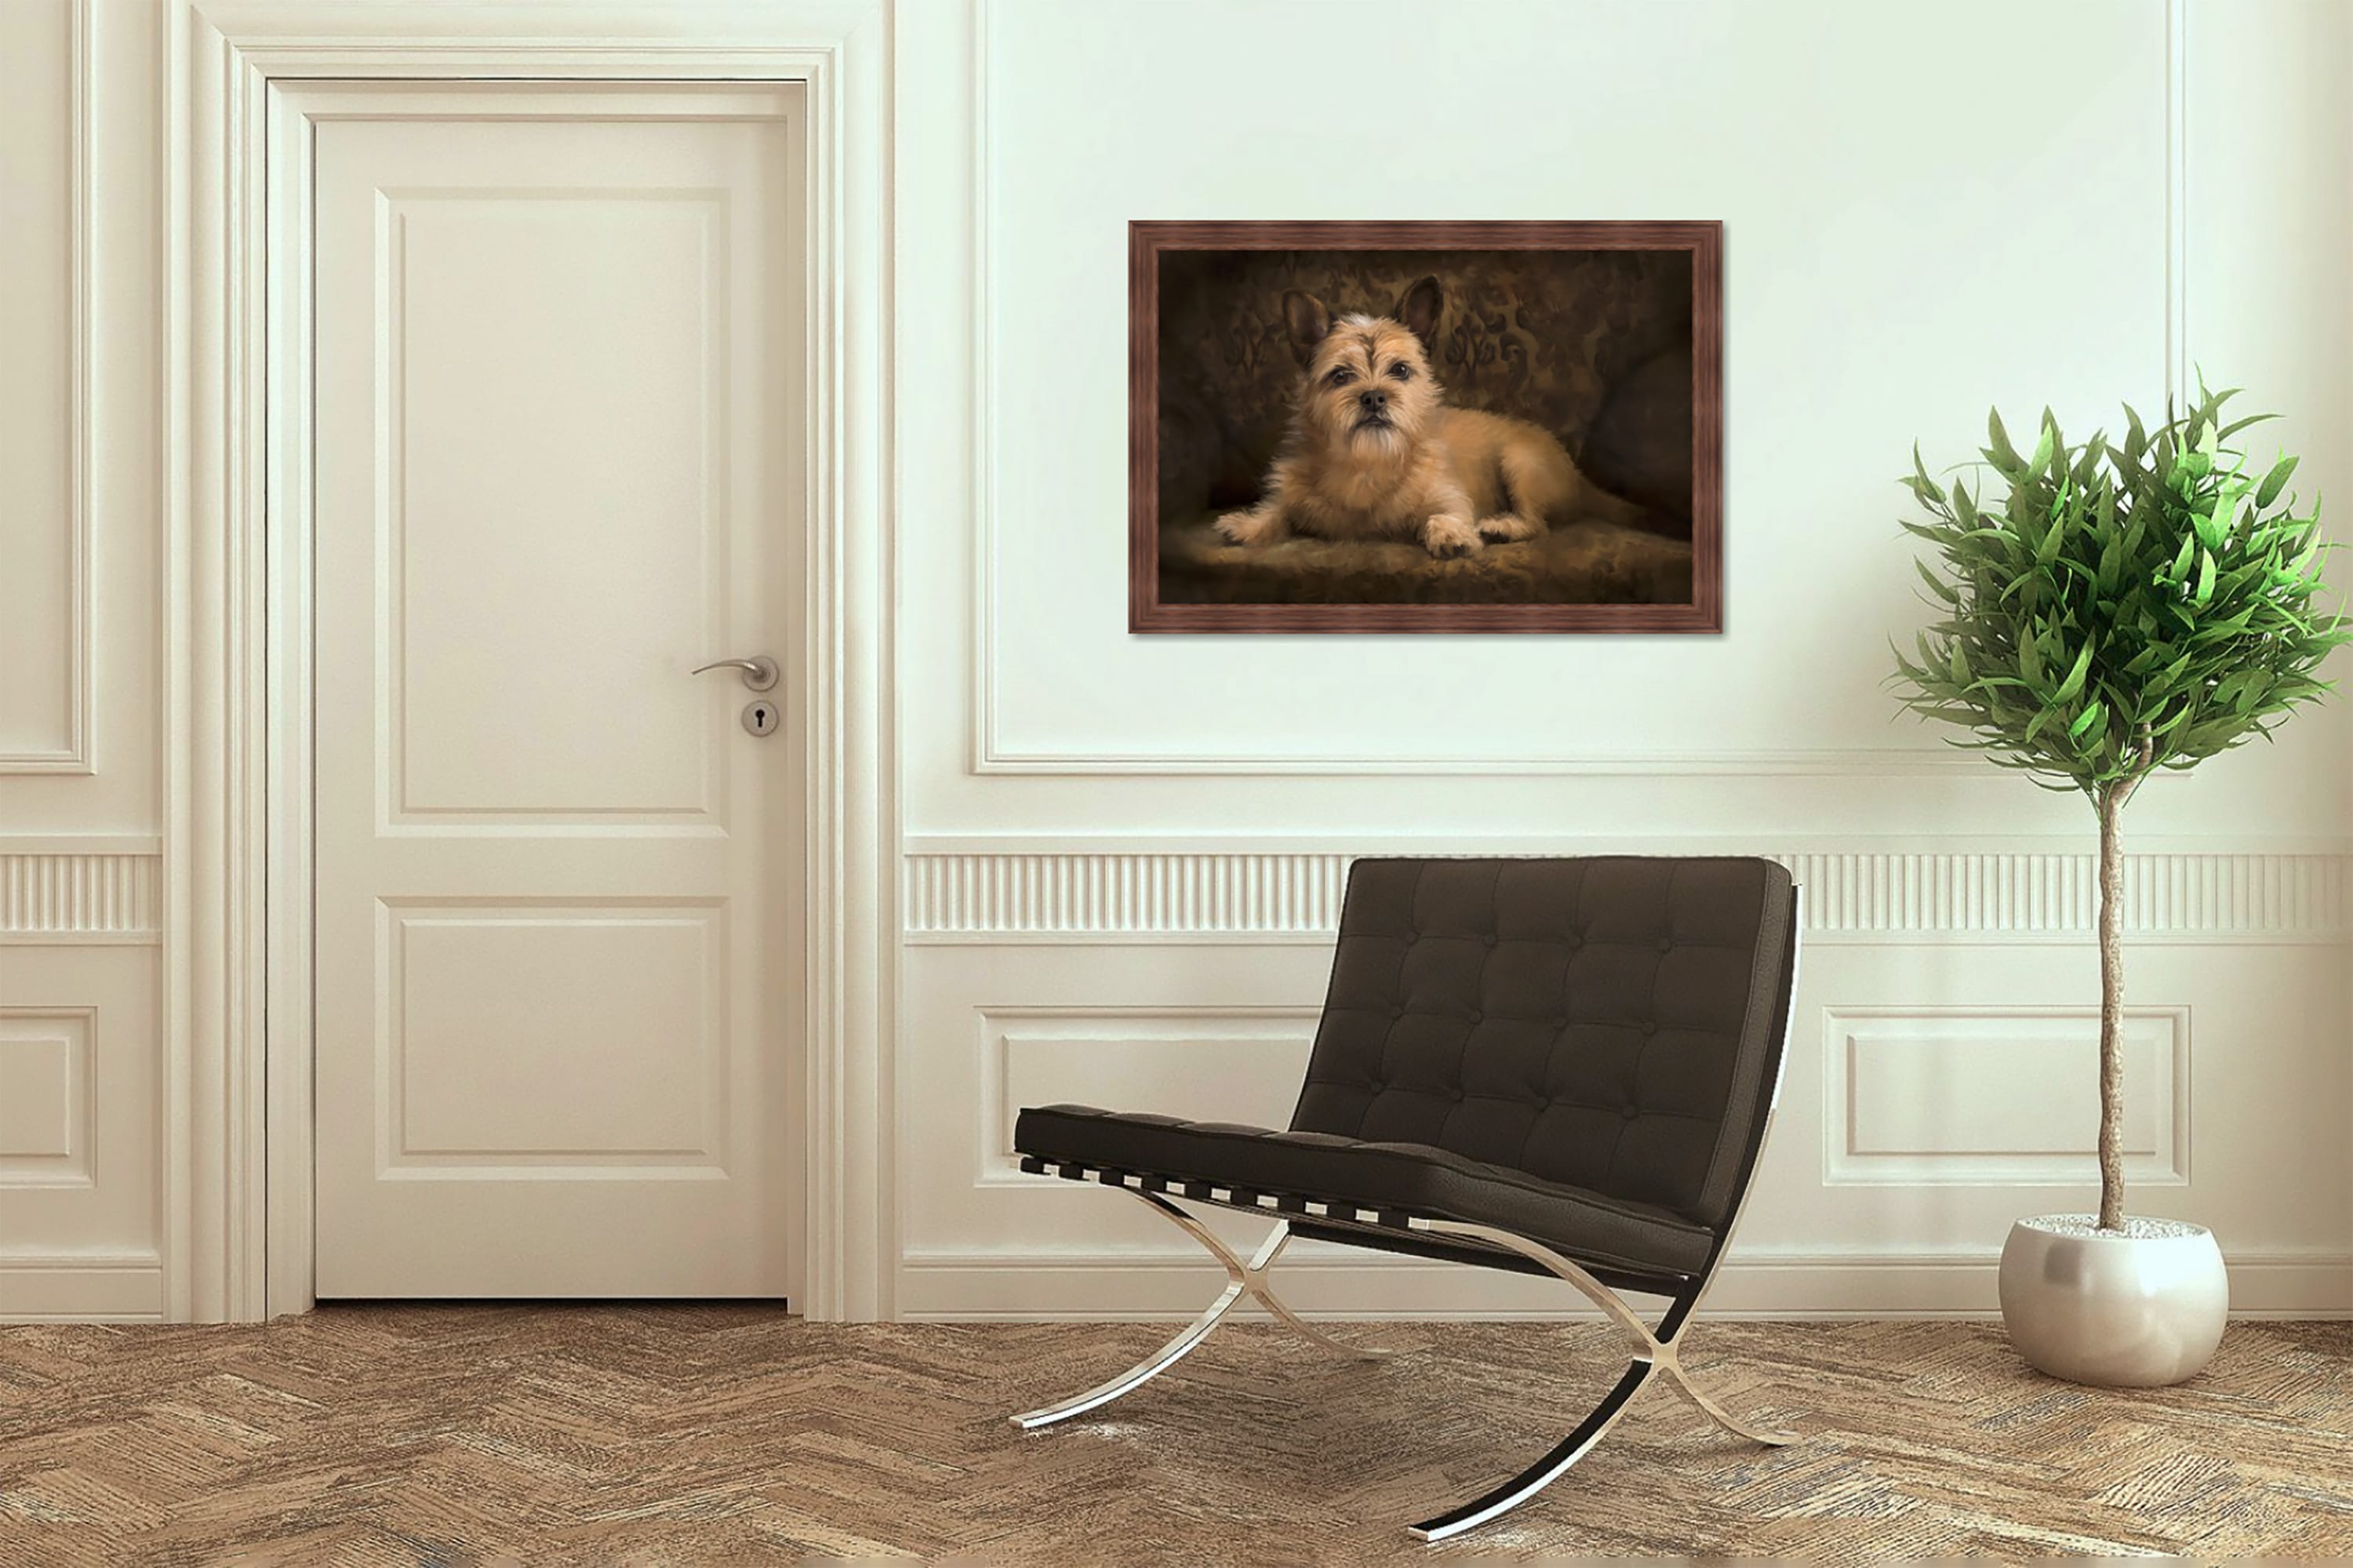 Framed painted portrait of a light brown dog hanging up on a wall